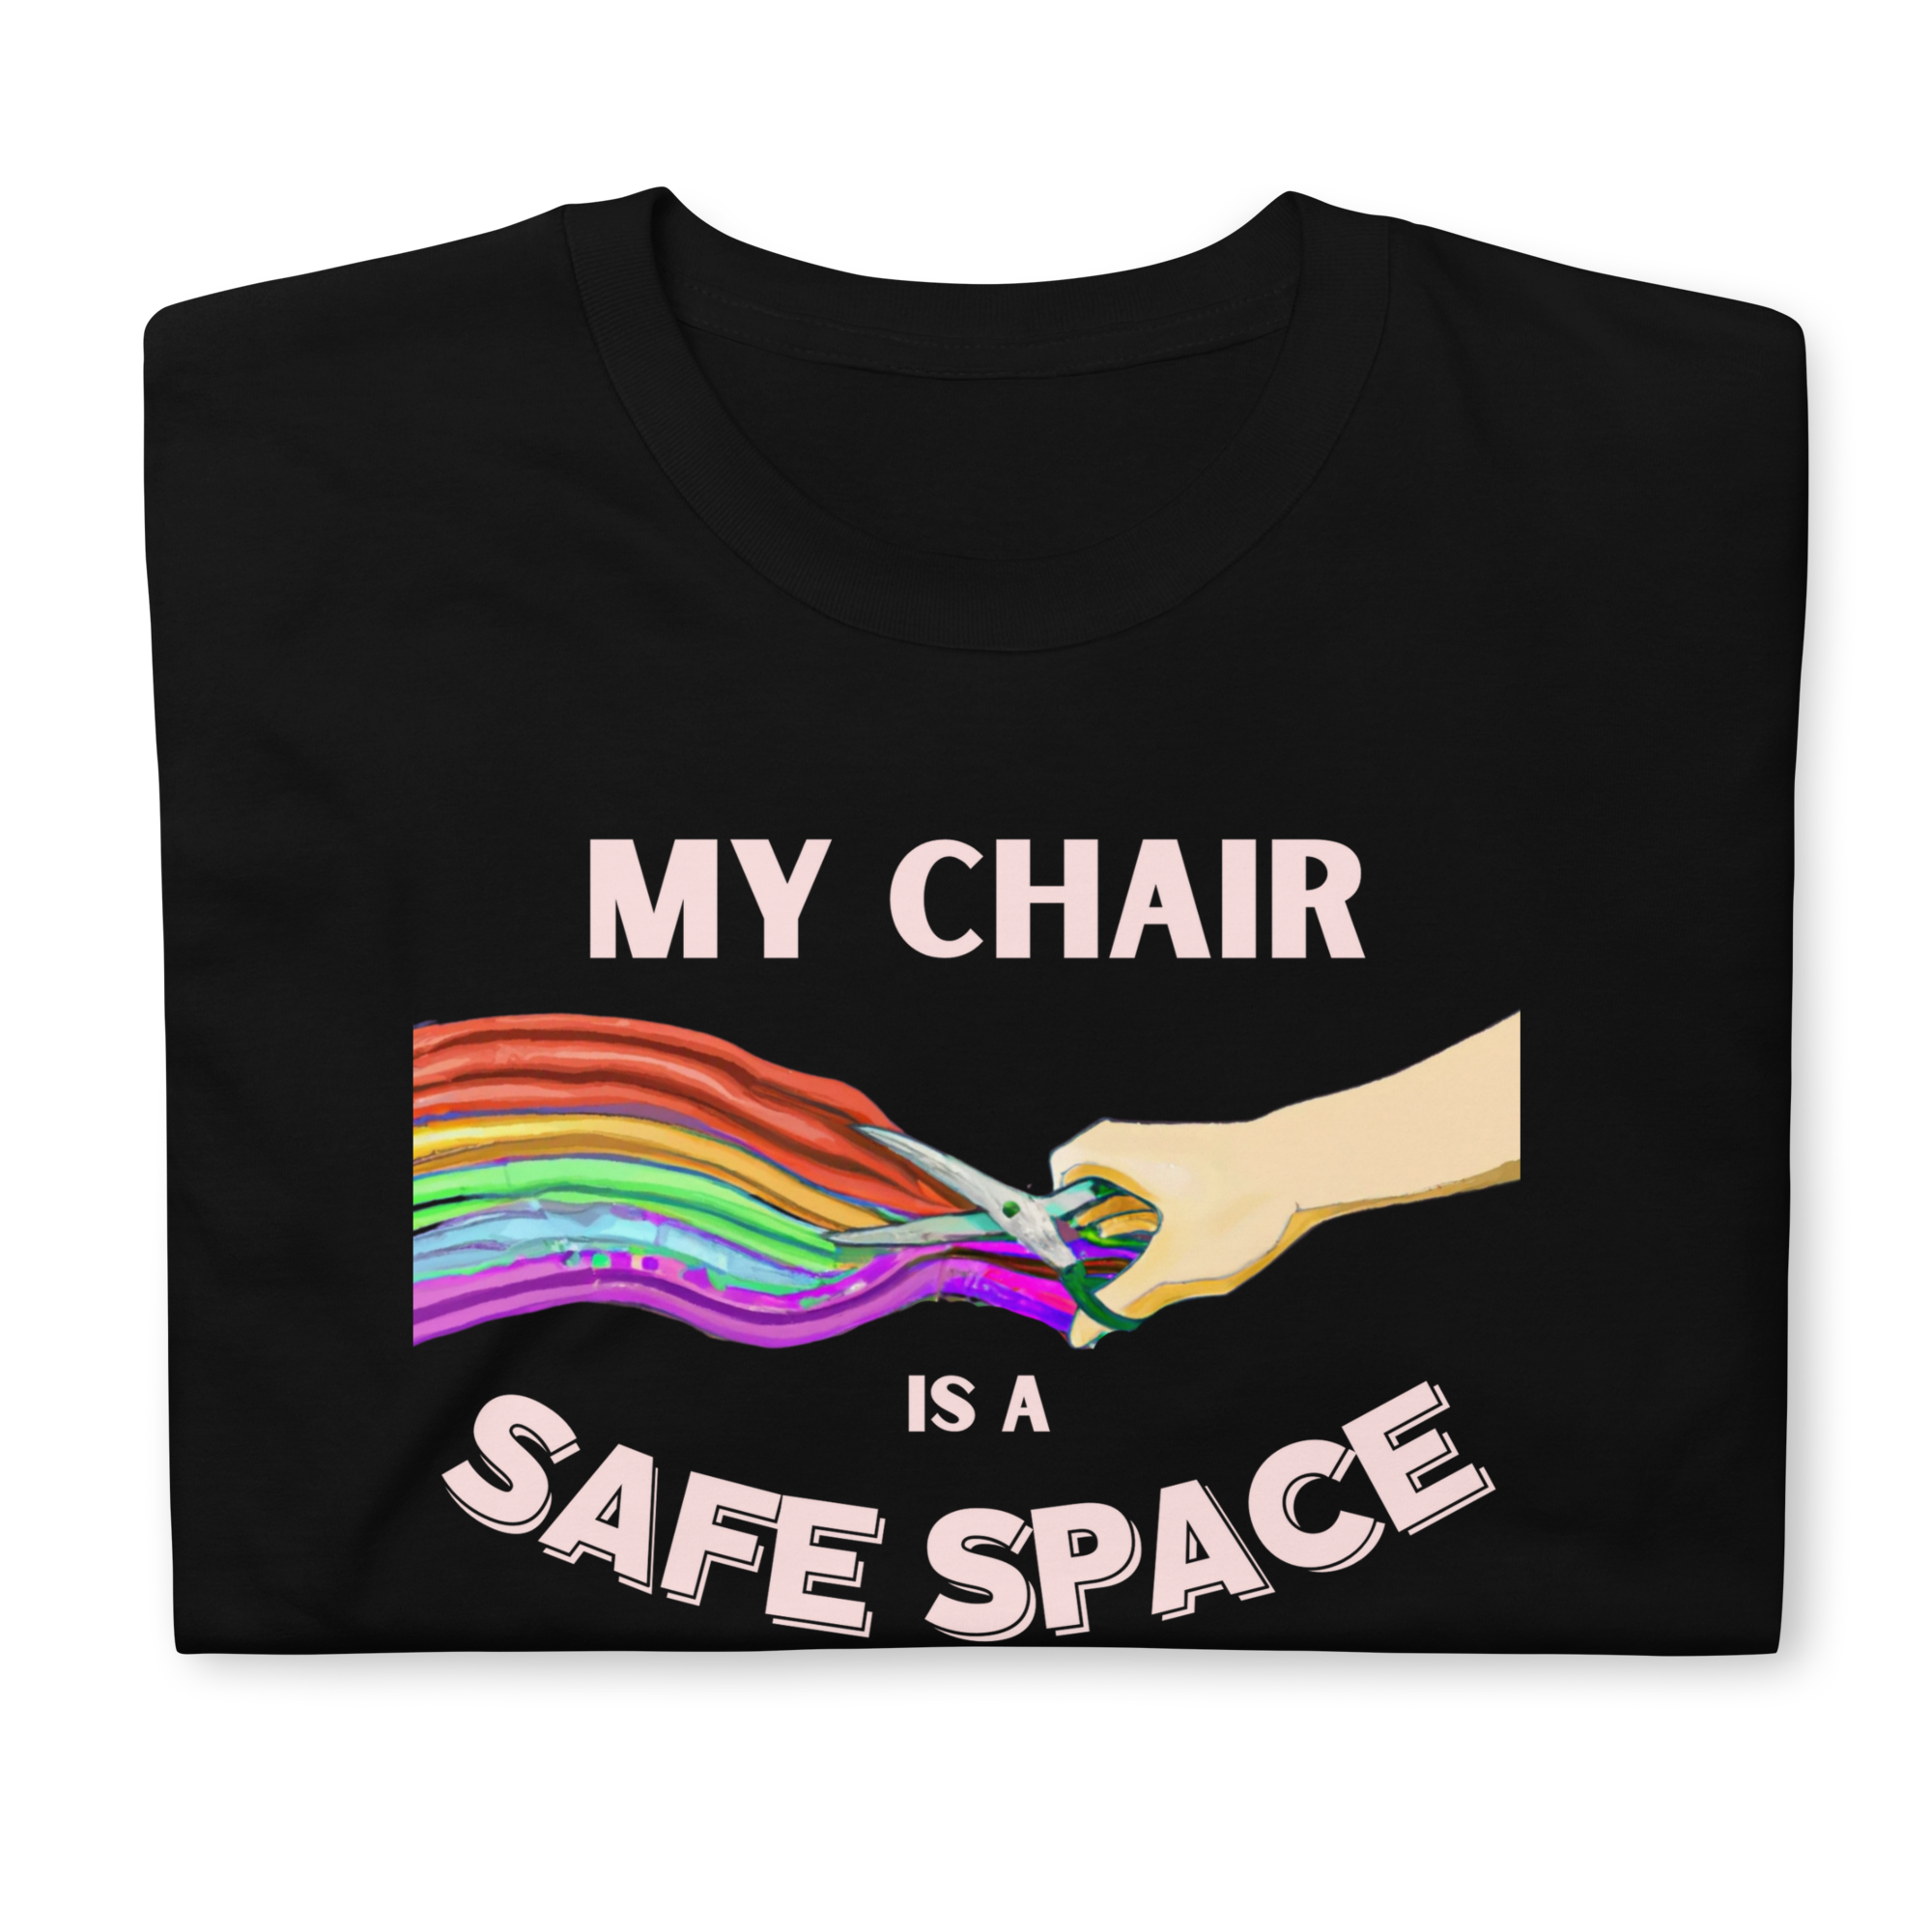 My Chair Is A Safe Space Unisex T-Shirt